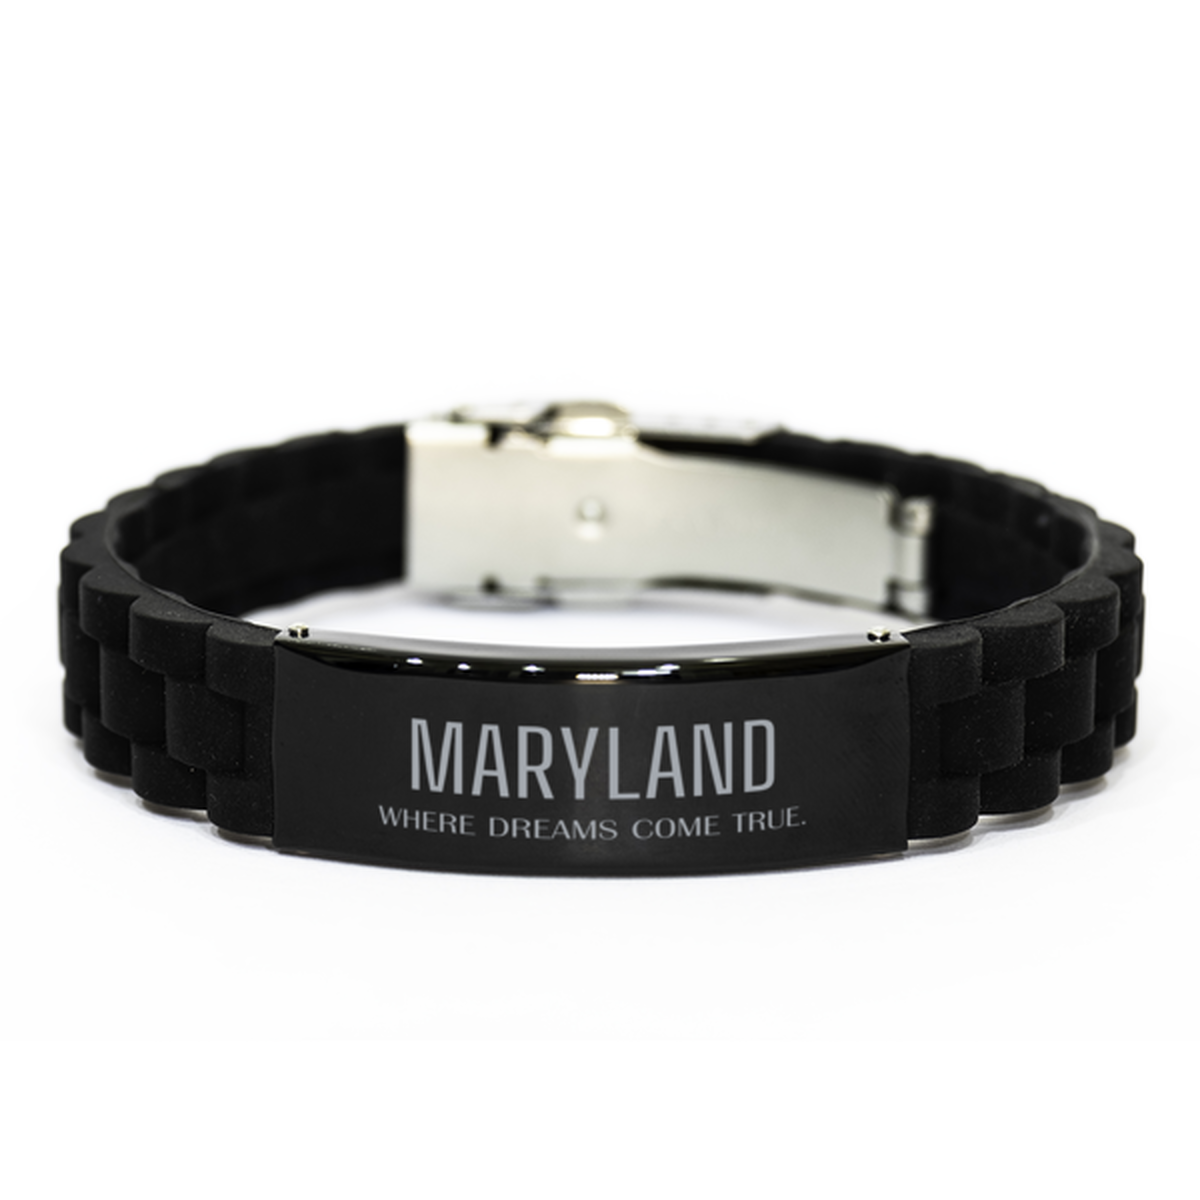 Love Maryland State Black Glidelock Clasp Bracelet, Maryland Where dreams come true, Birthday Inspirational Gifts For Maryland Men, Women, Friends